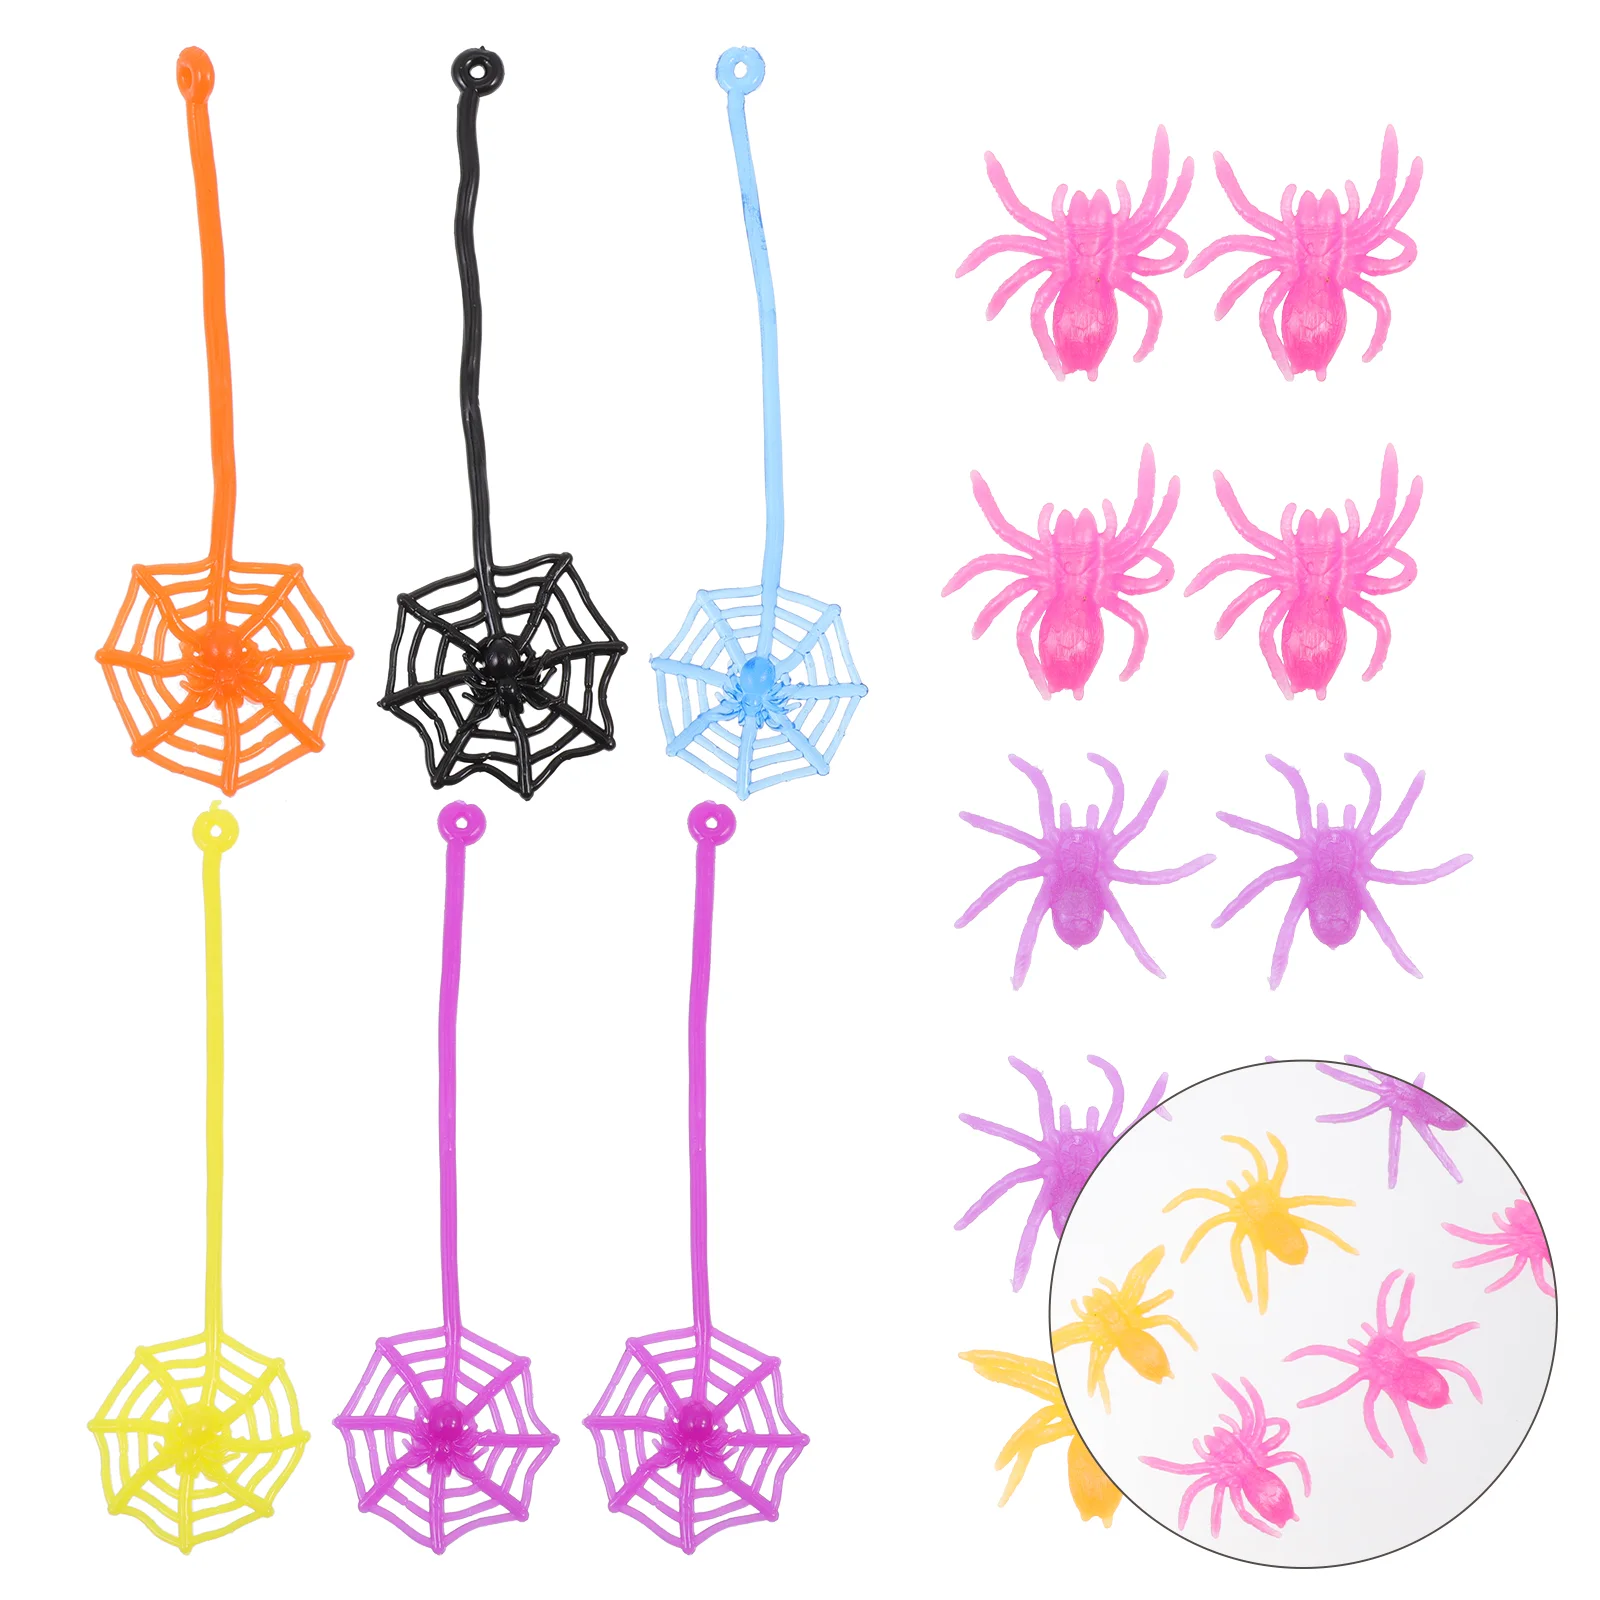 

20 Pcs Tricky Toys Kids Party Playthings Juguetes Adultos Prank Stuffed Spider Supple Festival Soft Sticky